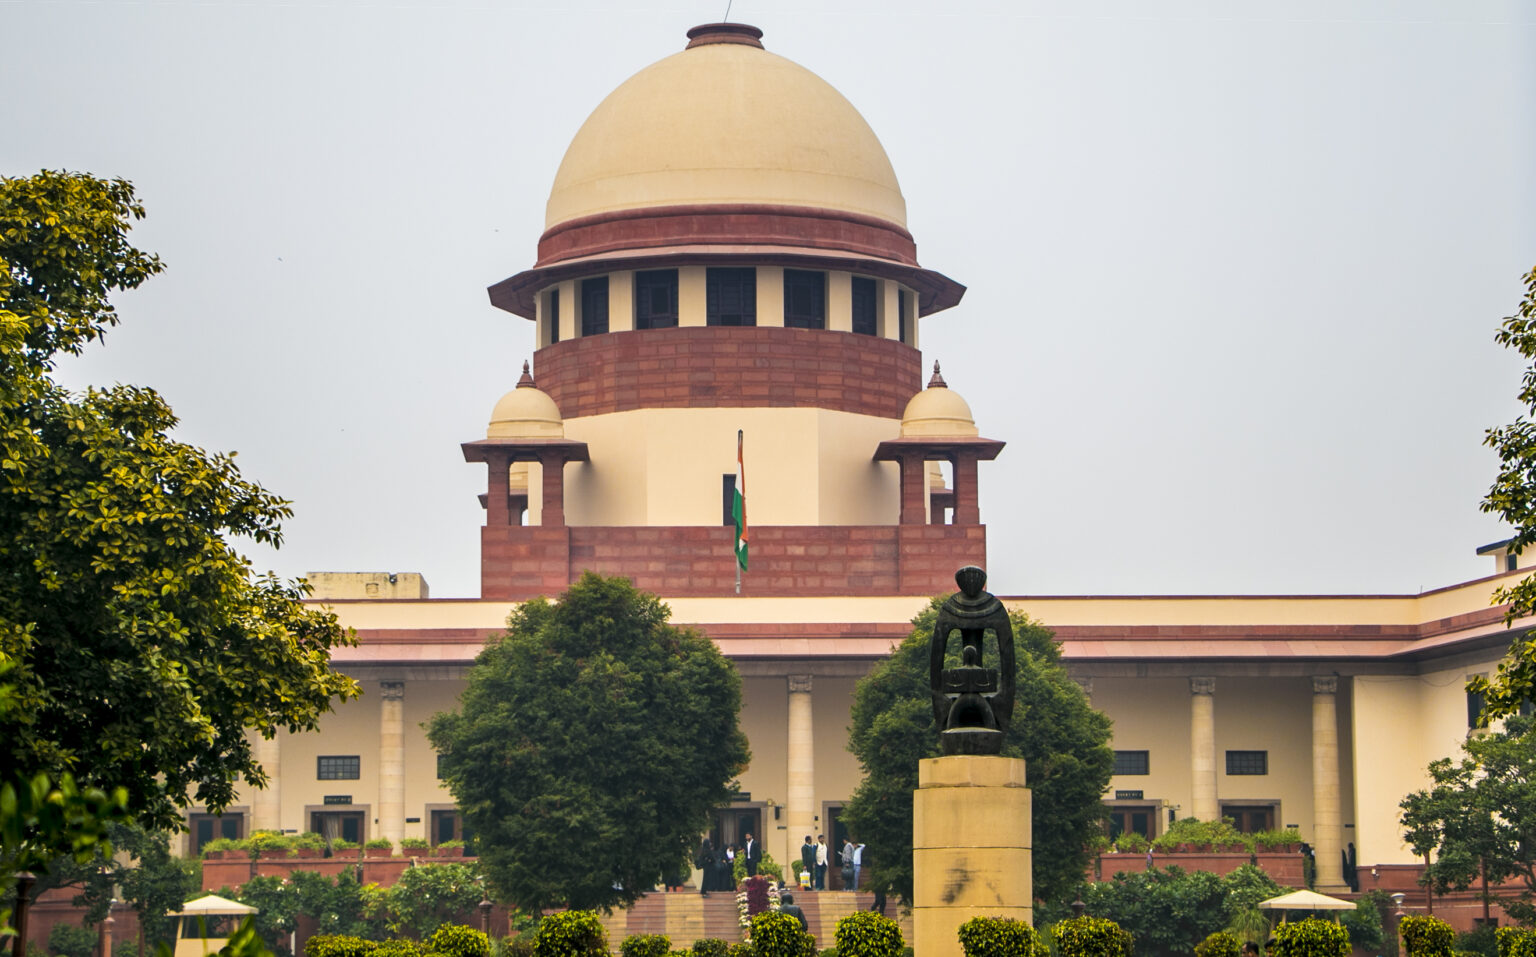 The Andhra Pradesh government petitions the Supreme Court to overturn the High Court's decision to designate Amaravati as the state capital - Asiana Times